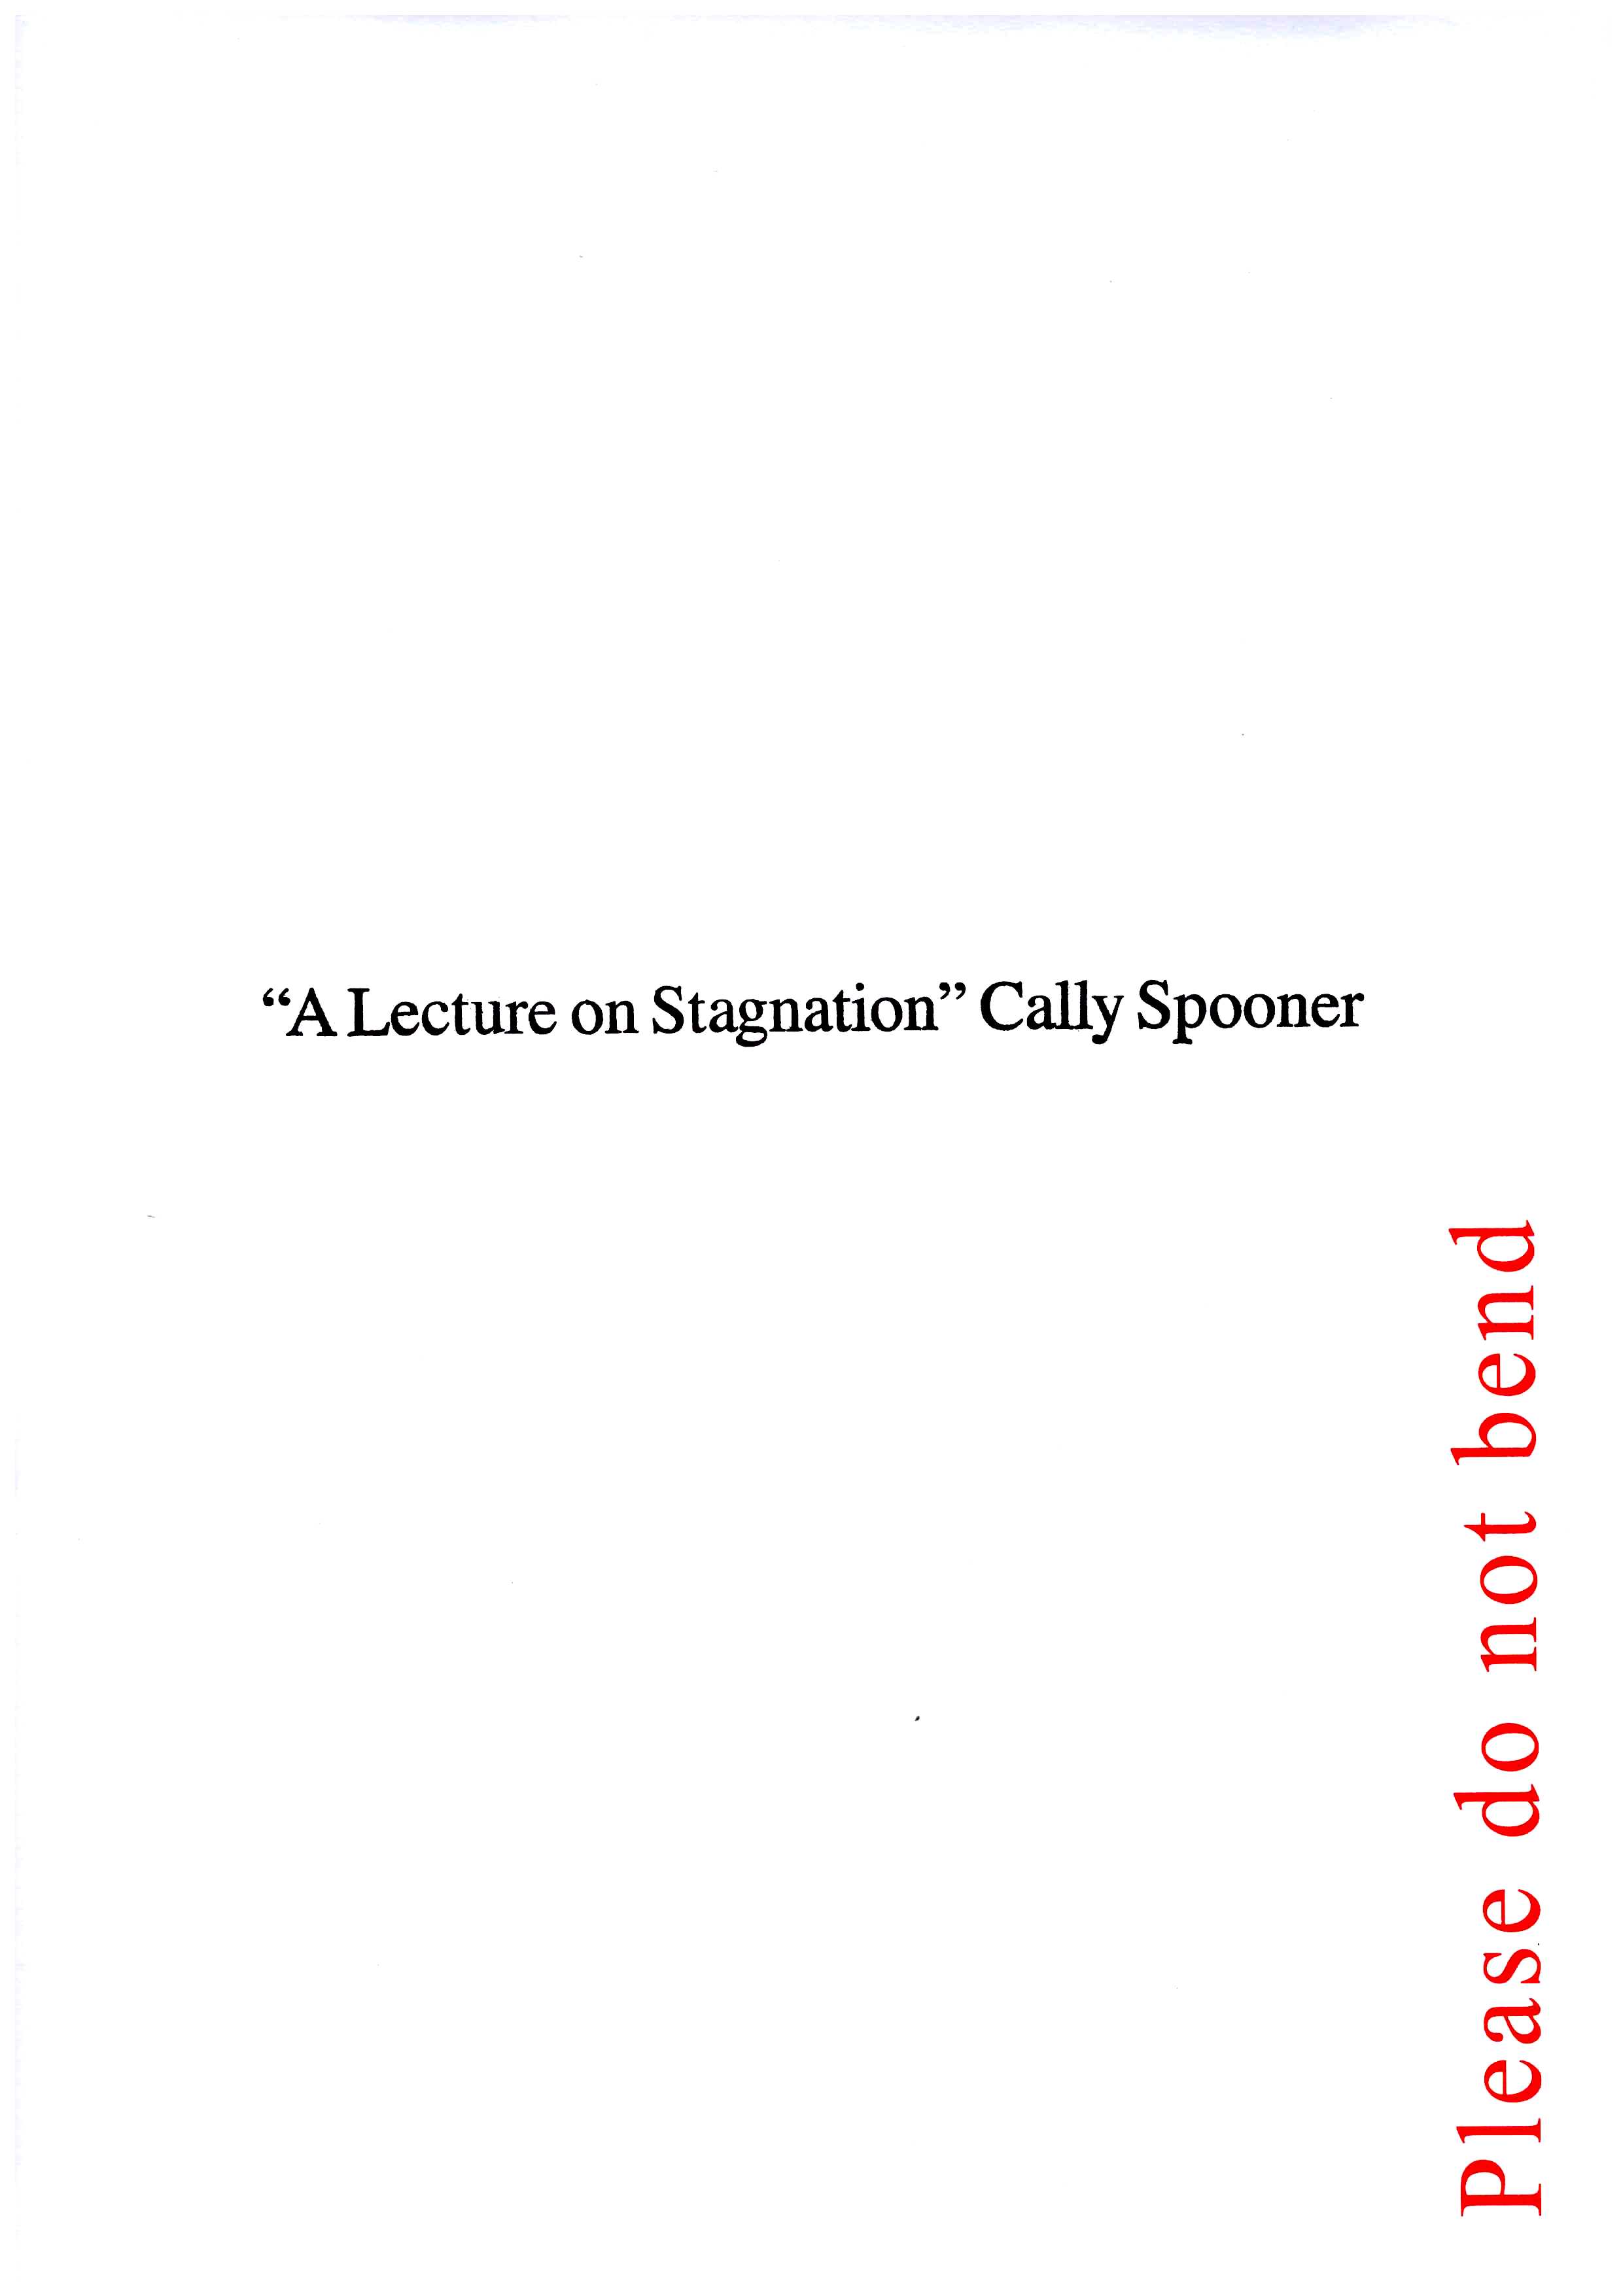 SPOONER, Cally - “A Lecture on Stagnation”